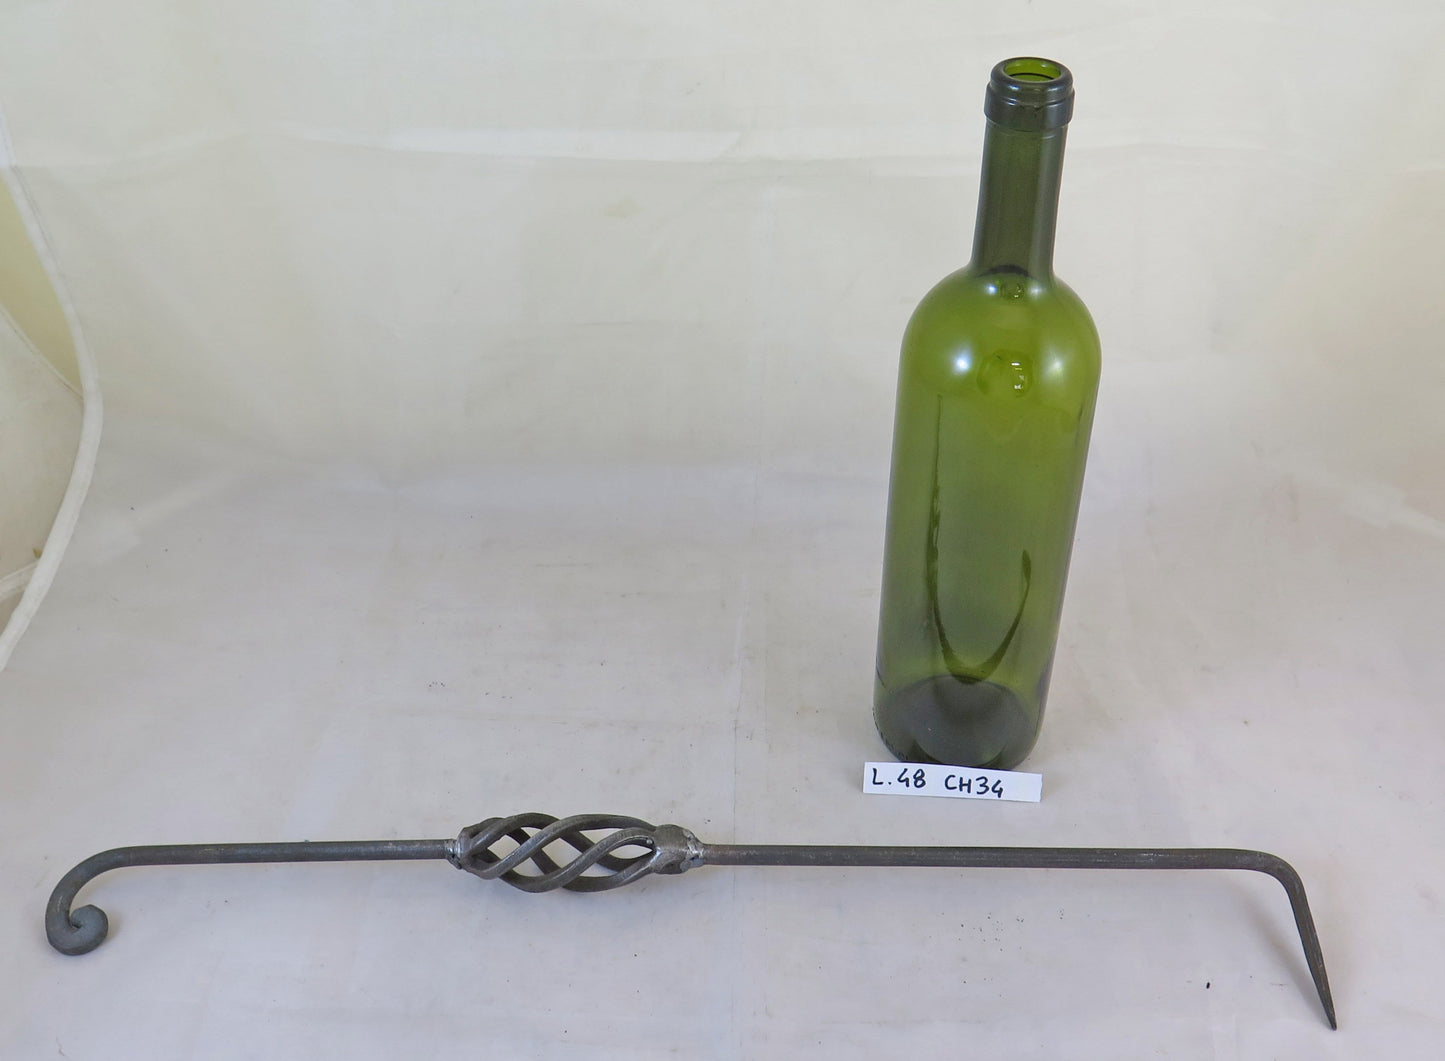 OLD FIREPLACE POKER IN WROUGHT IRON FIREPLACE TOOL 48cm CH34